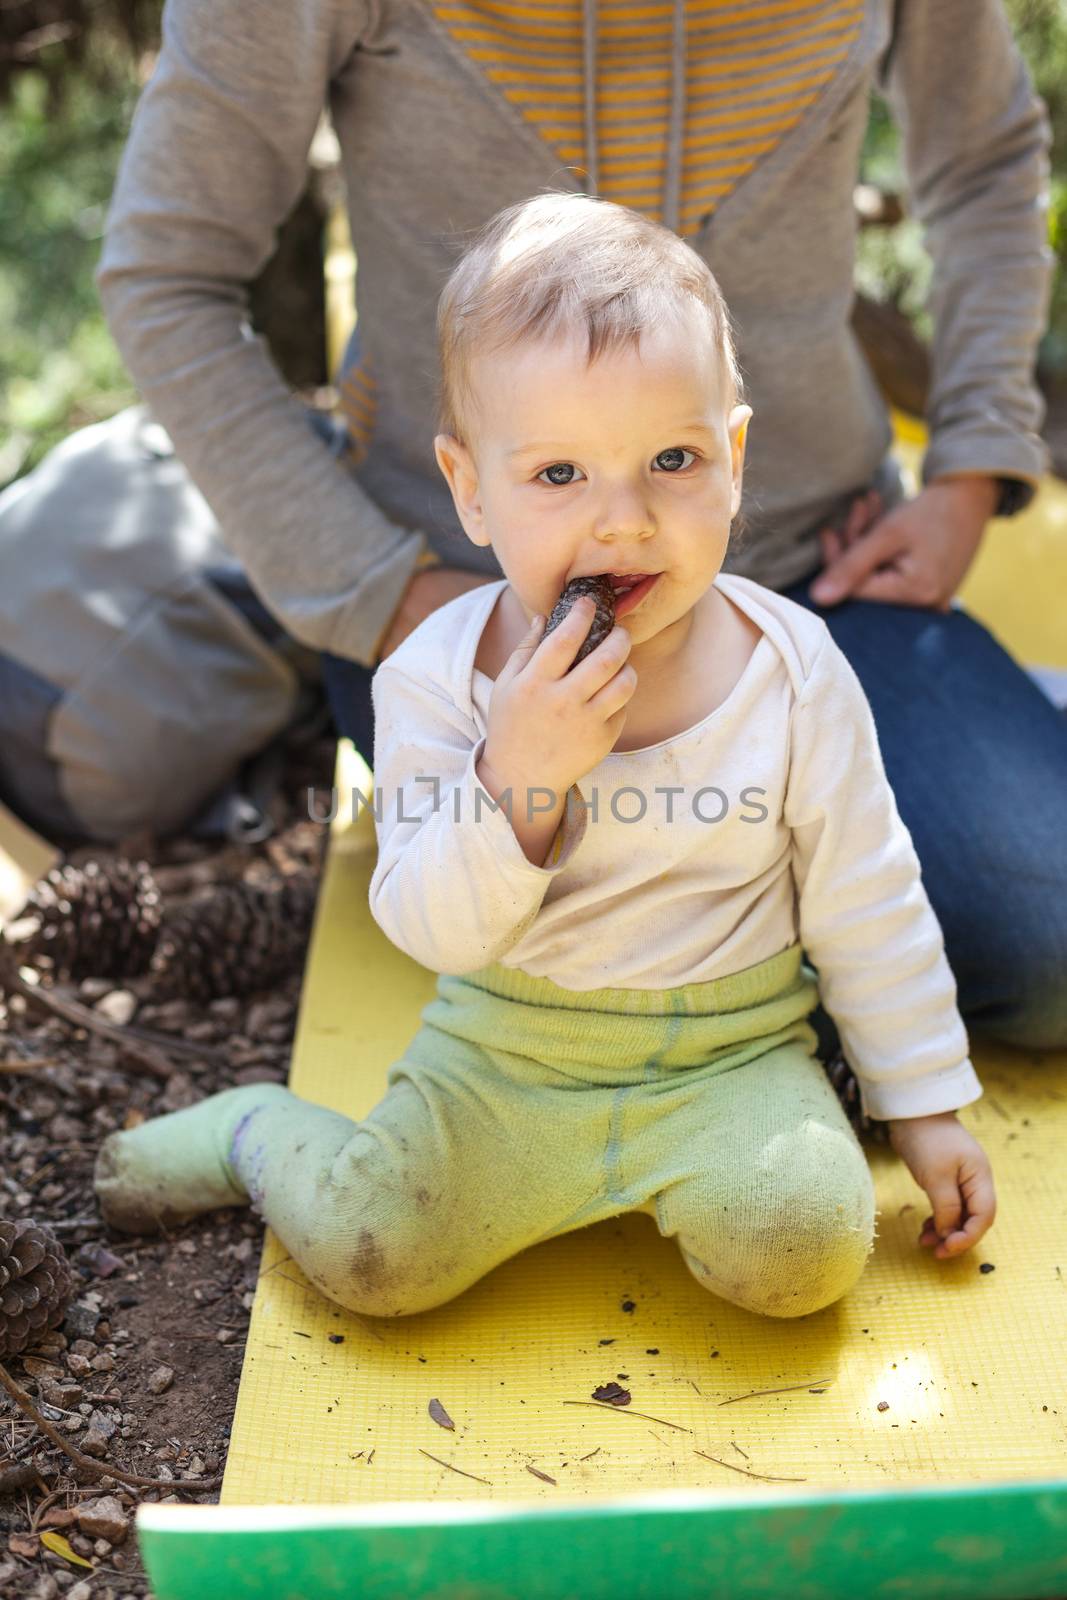 Little boy biting a cone, mother behind the boy by photobac